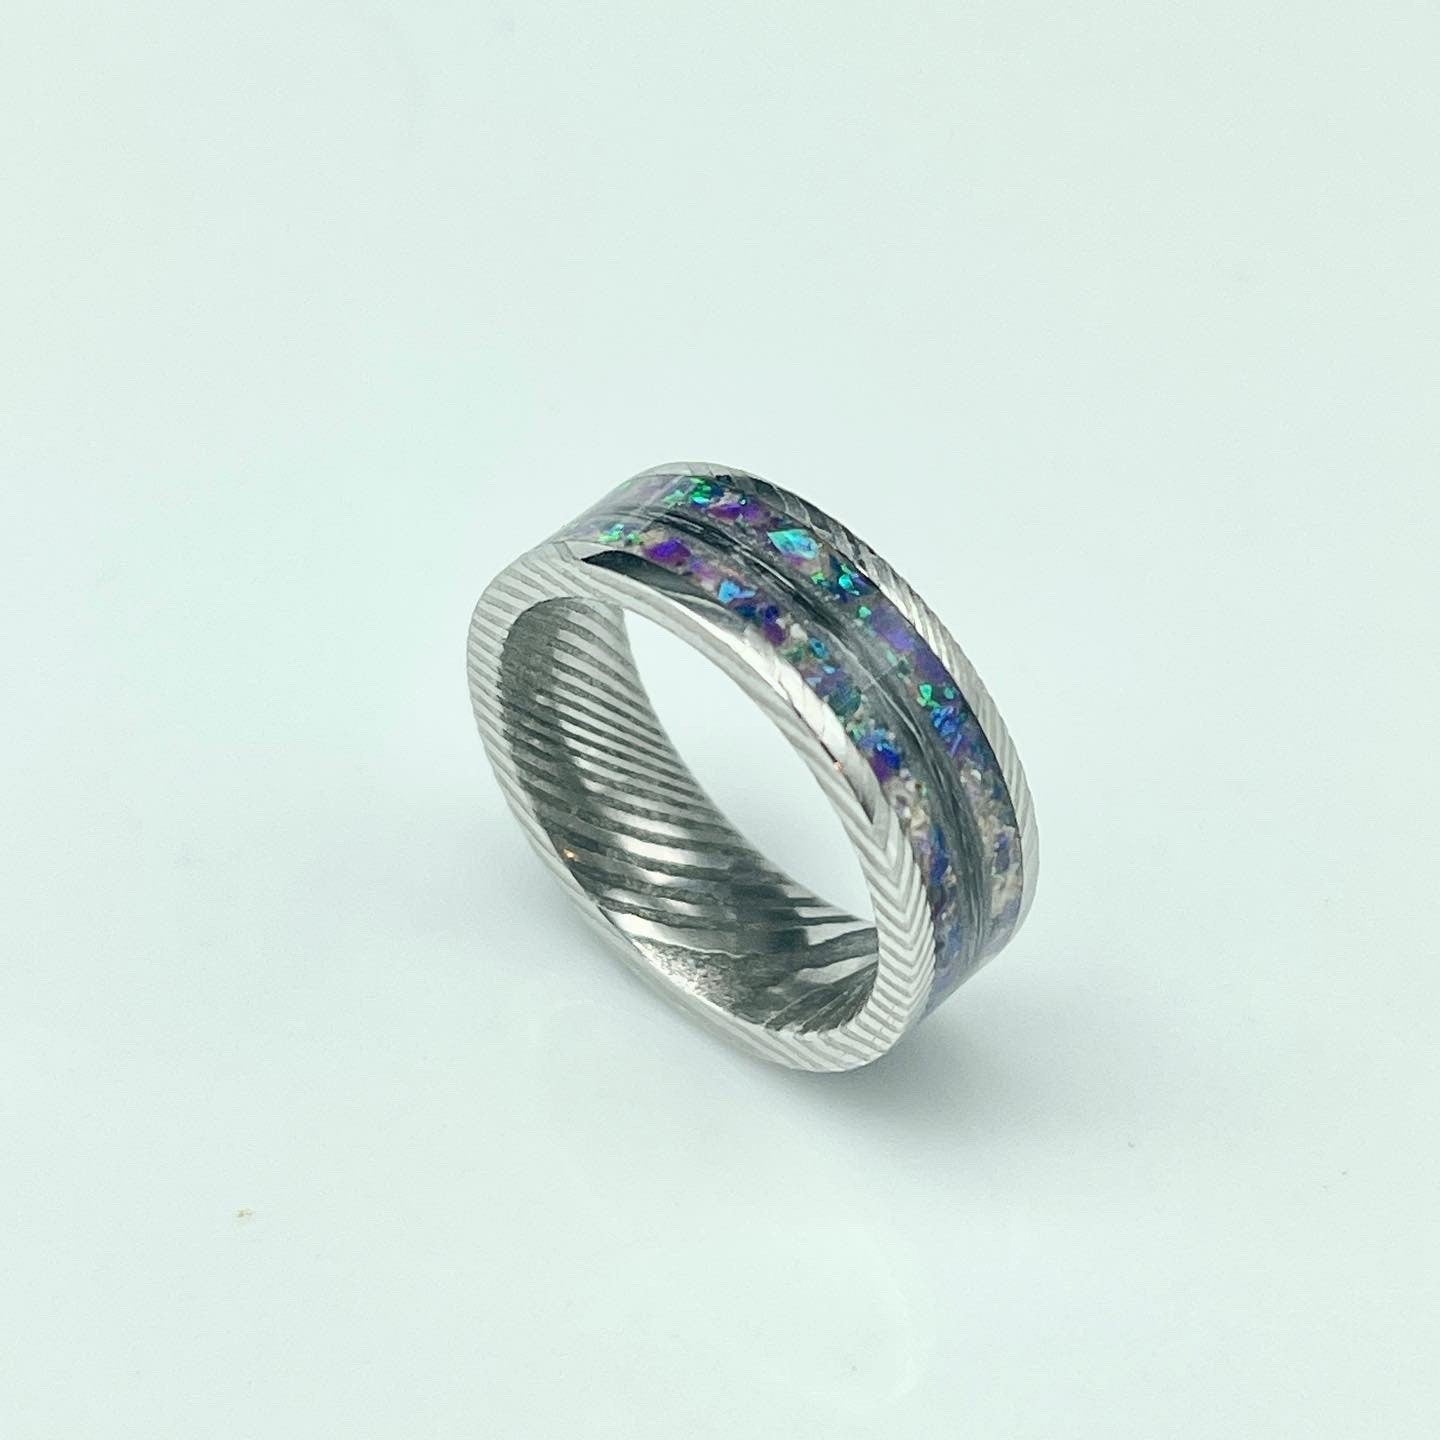 8mm Cremation Ring with Fur or Hair as Center Accent